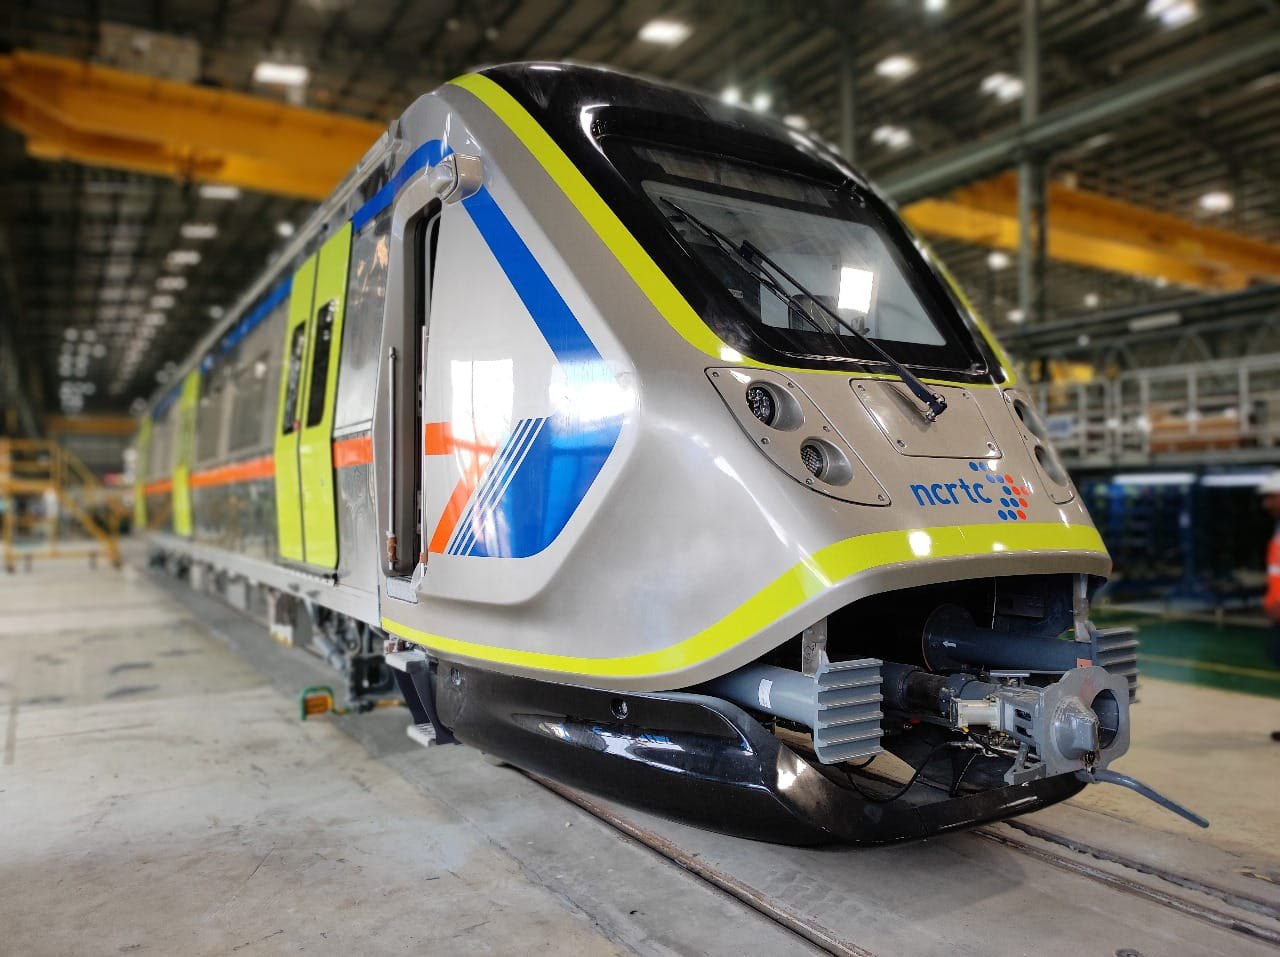 The Adessia EMU for Meerut at Alstom's plant